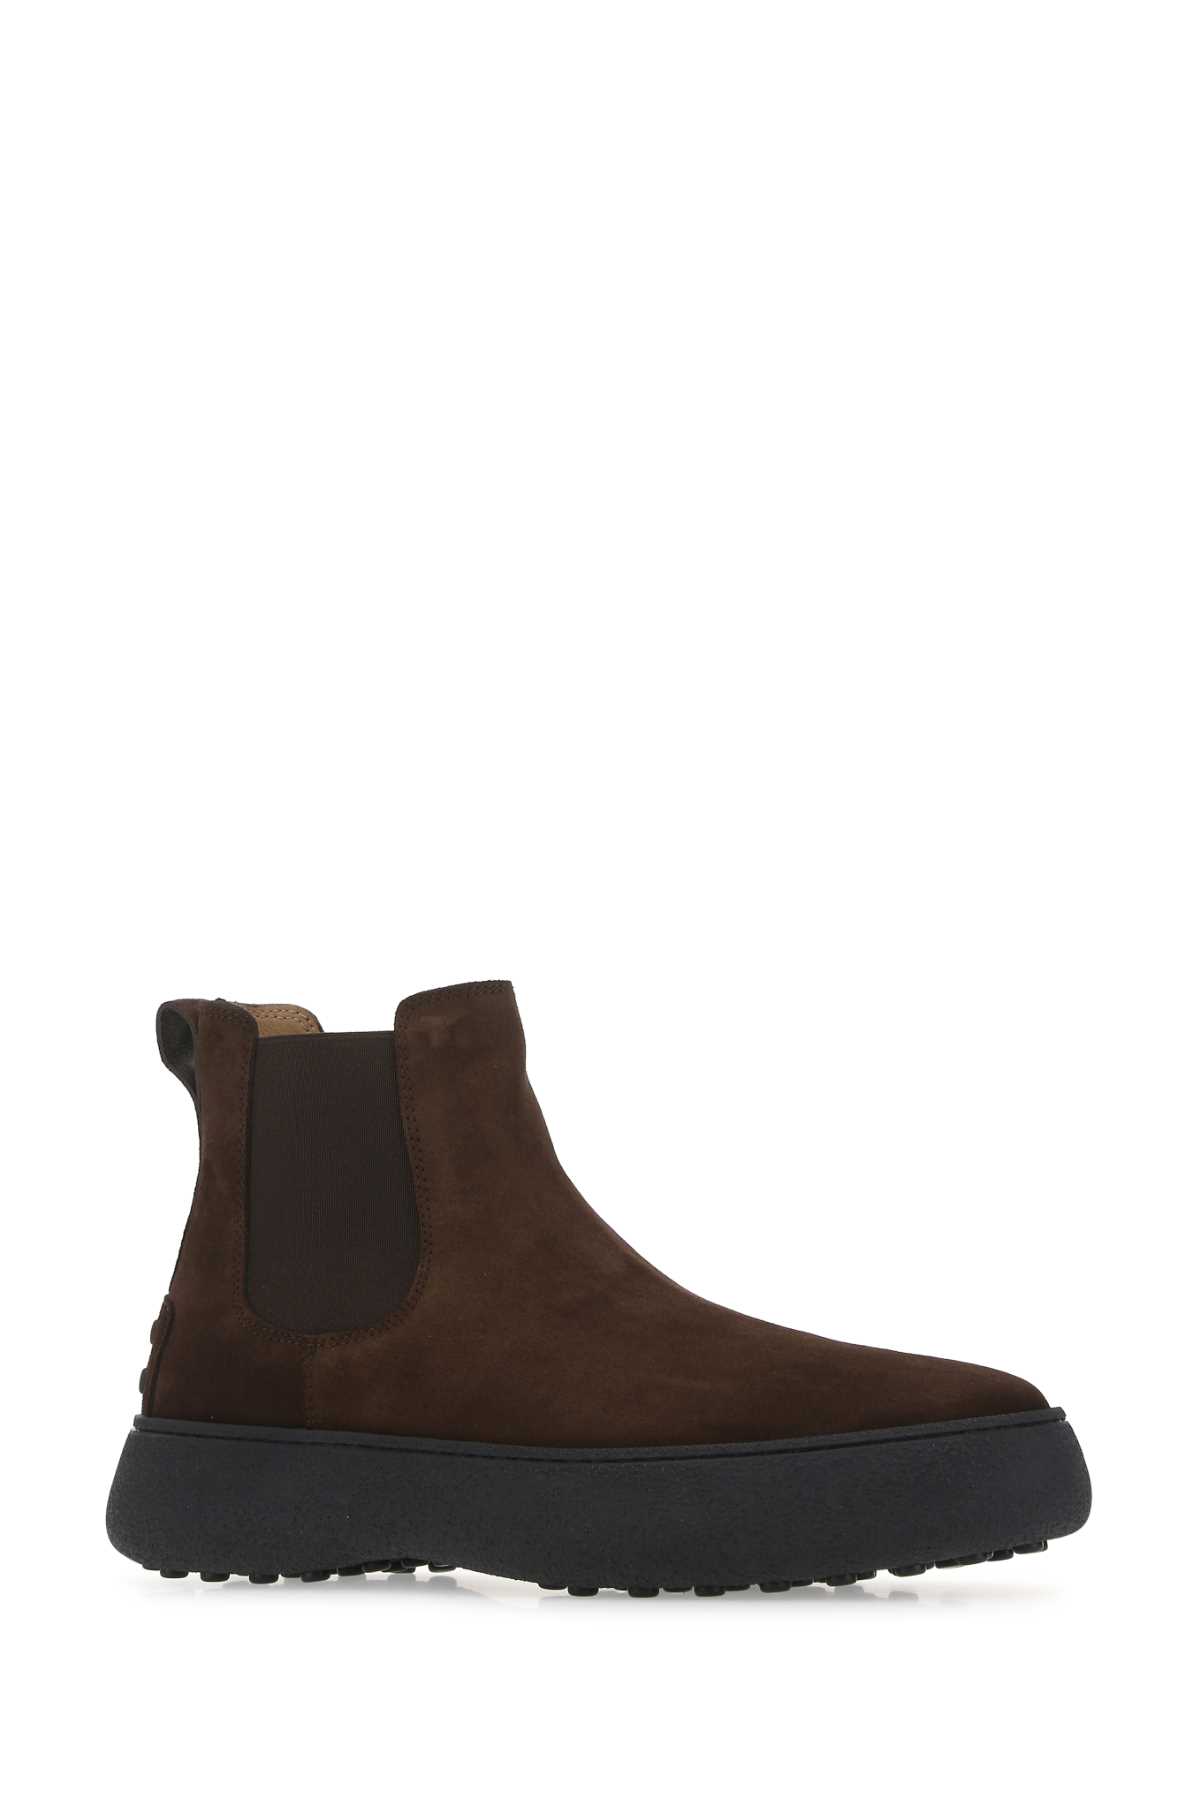 Tod's Chocolate Suede Ankle Boots In S611